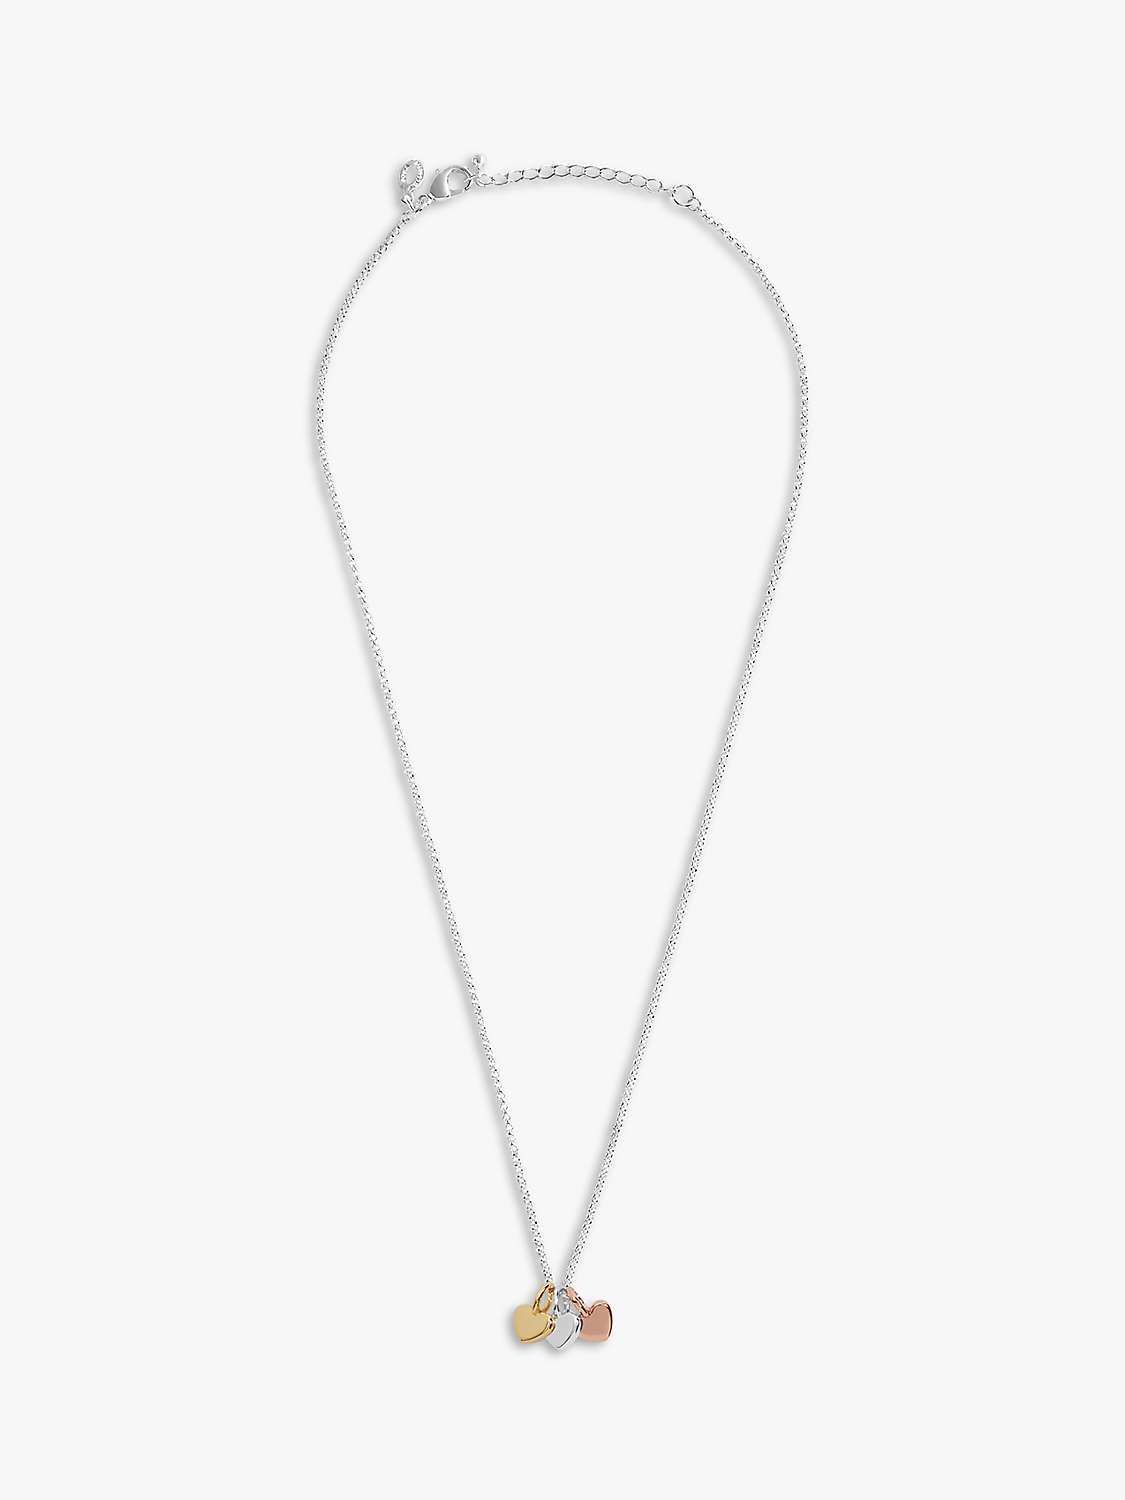 Buy Joma Jewellery Mini Charms Triple Heart Pendant Necklace, Multi Online at johnlewis.com